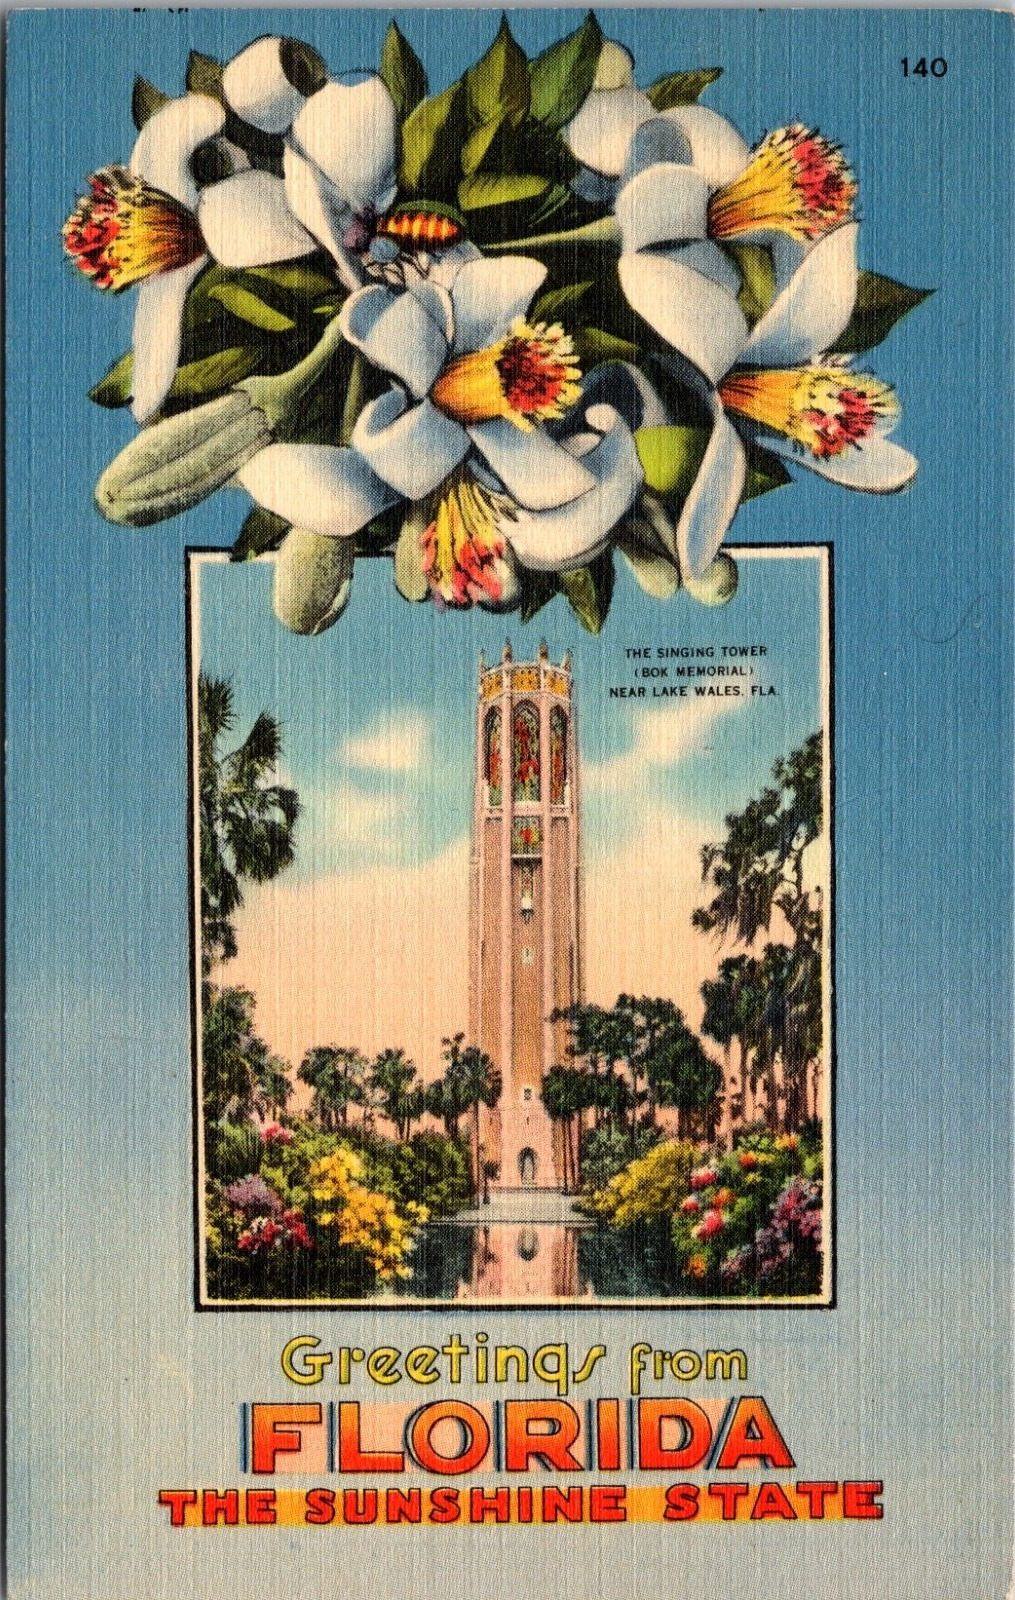 Florida - Greetings from Florida, The Sunshine State - Vintage LINEN- Postcard